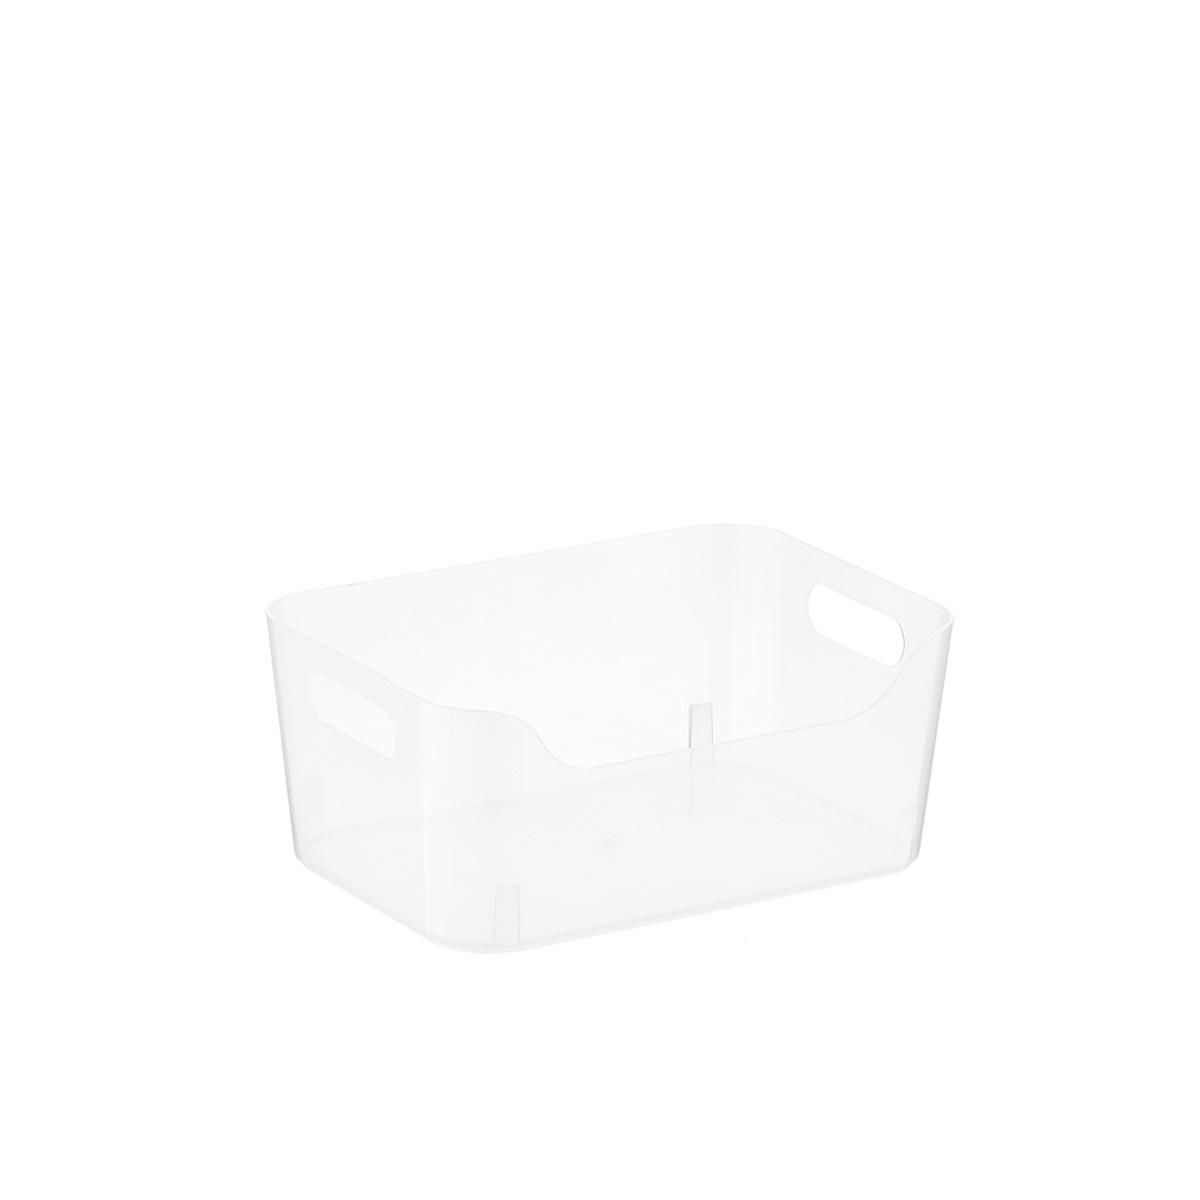 7-5/8" x 5-1/4" x 3-1/8" h | The Container Store